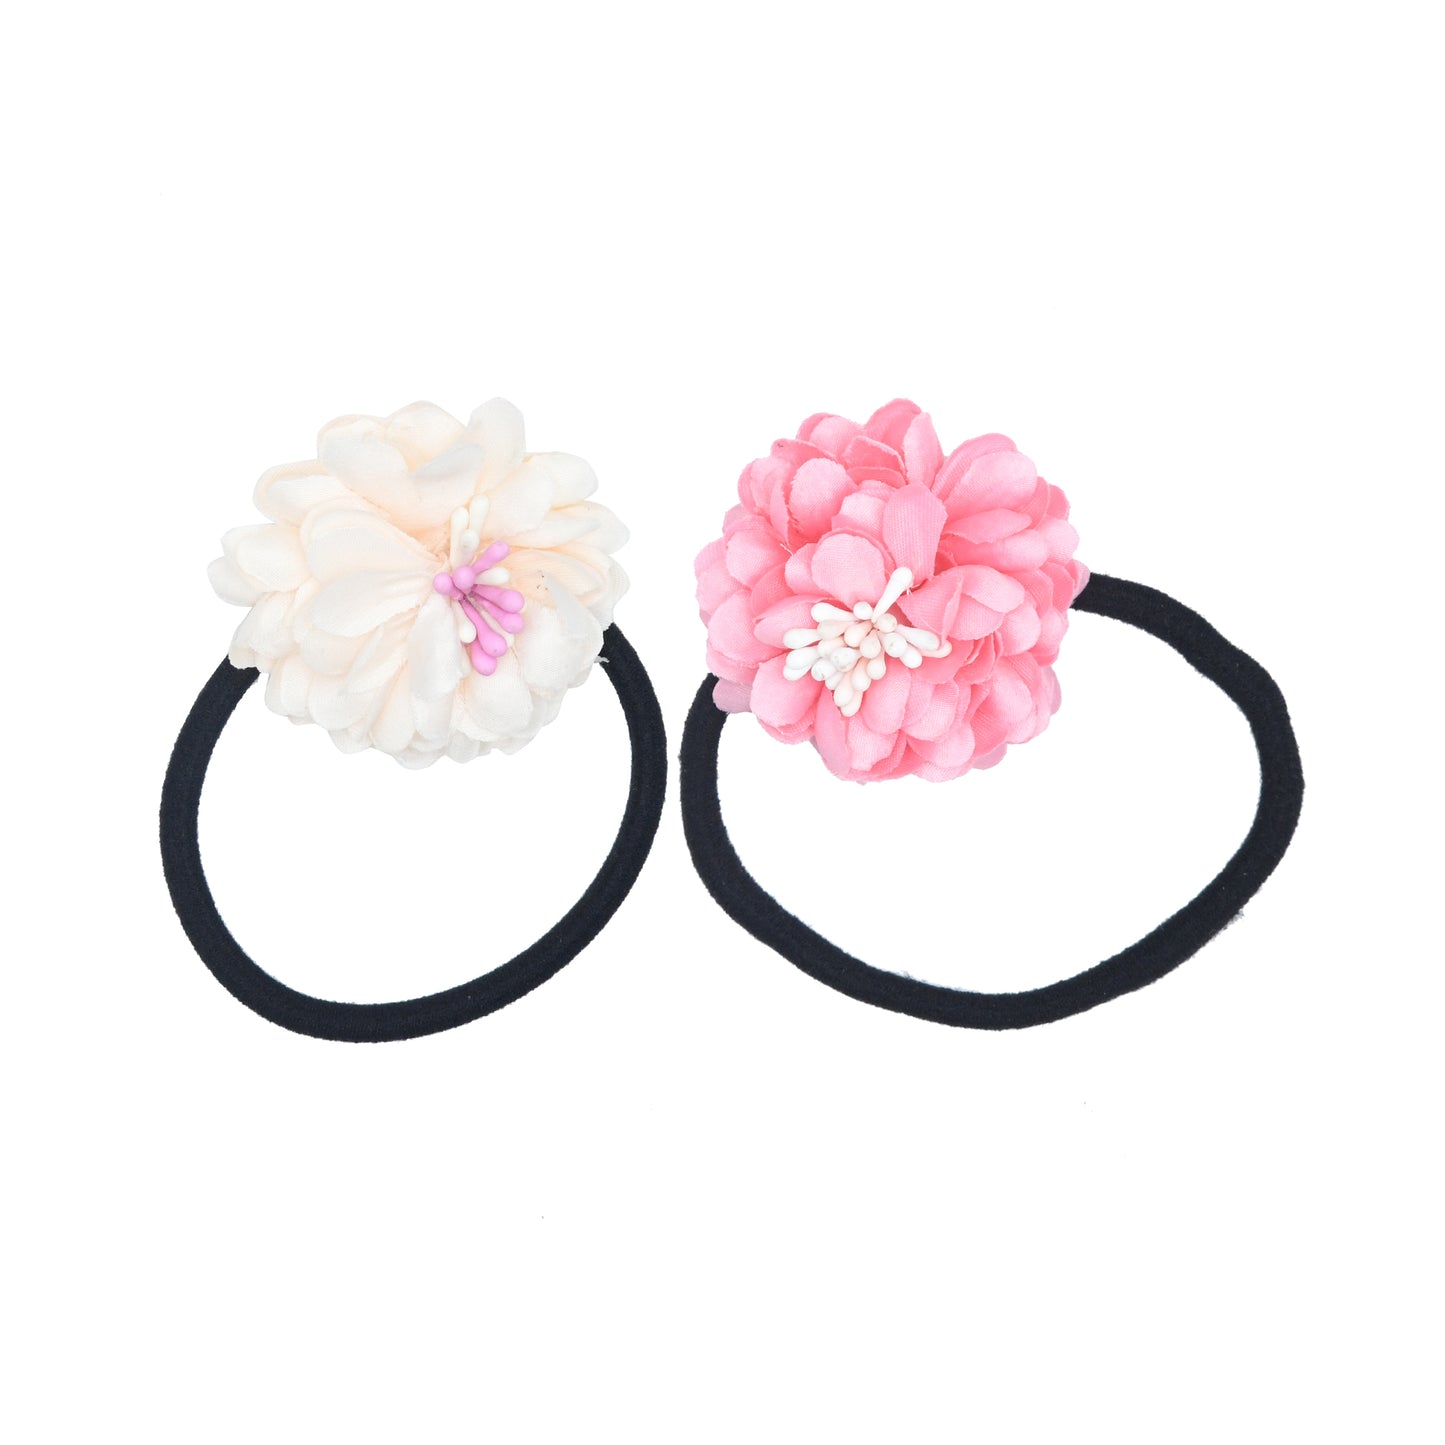 Floral Hair Ties for Girls